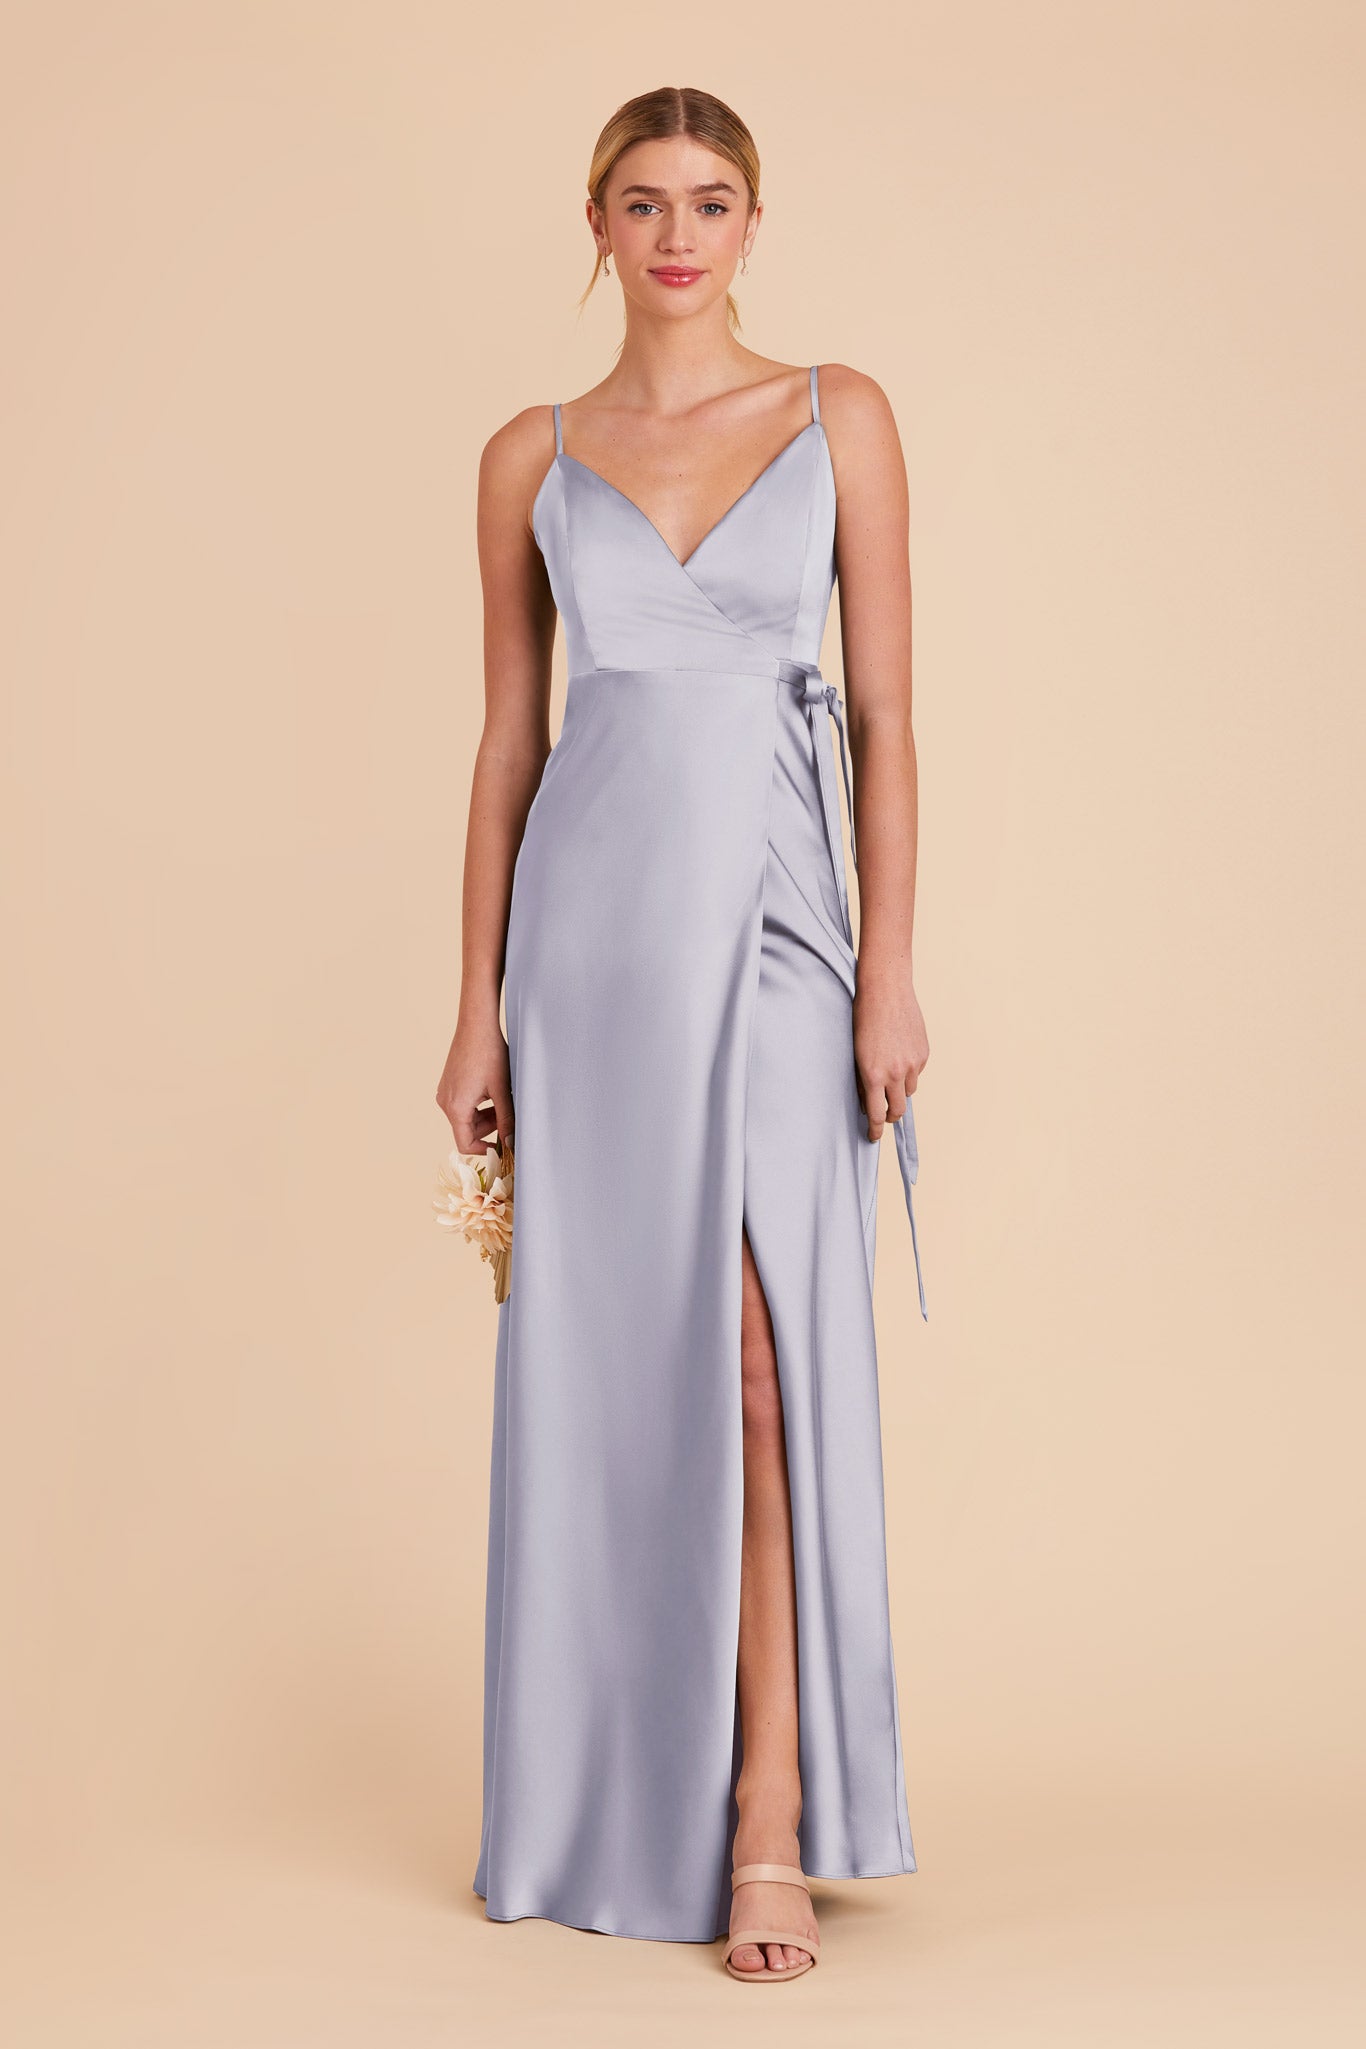 Cindy Dress in Satin Neutral Champagne